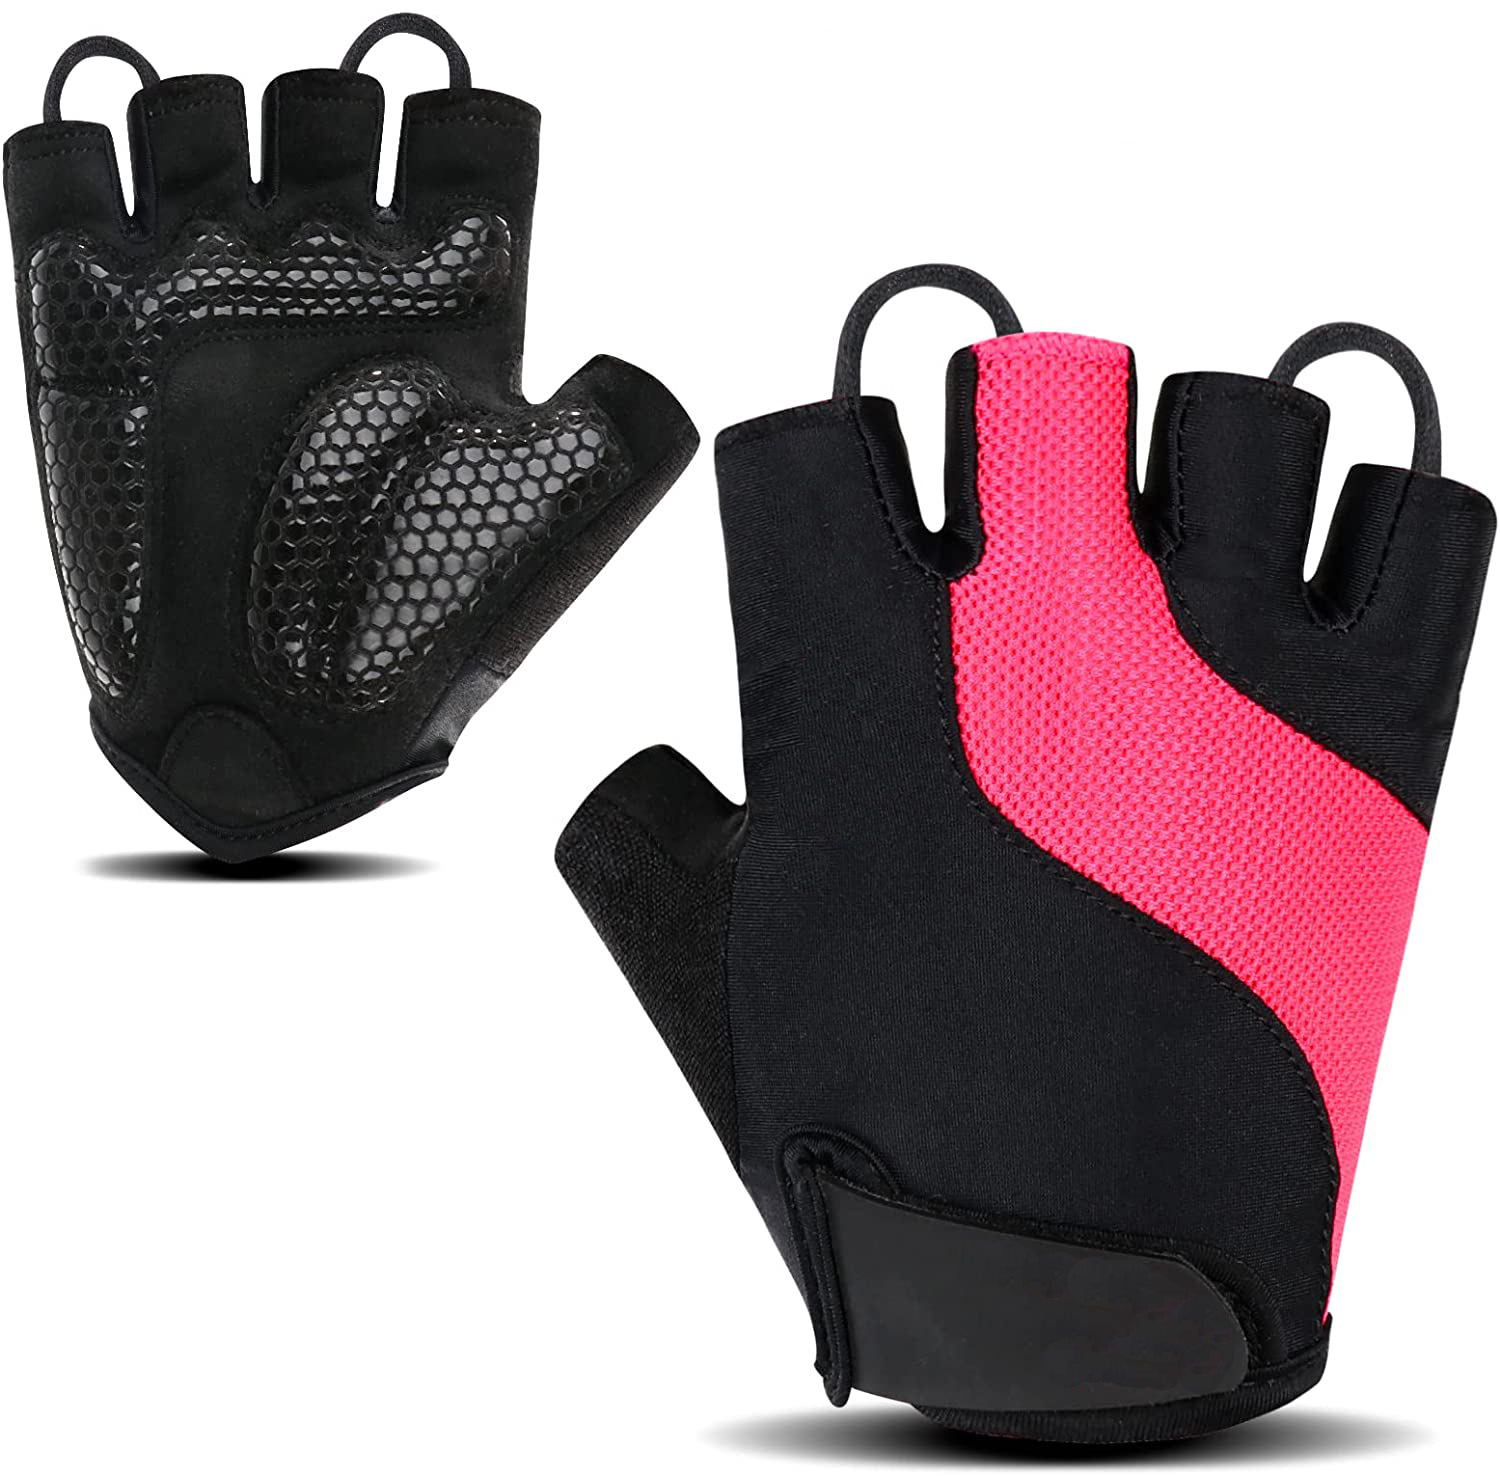 Top Quality Outdoor Sports Cycling Gloves Wholesale Reasonable Price Reliable Supplier Manufacturer 